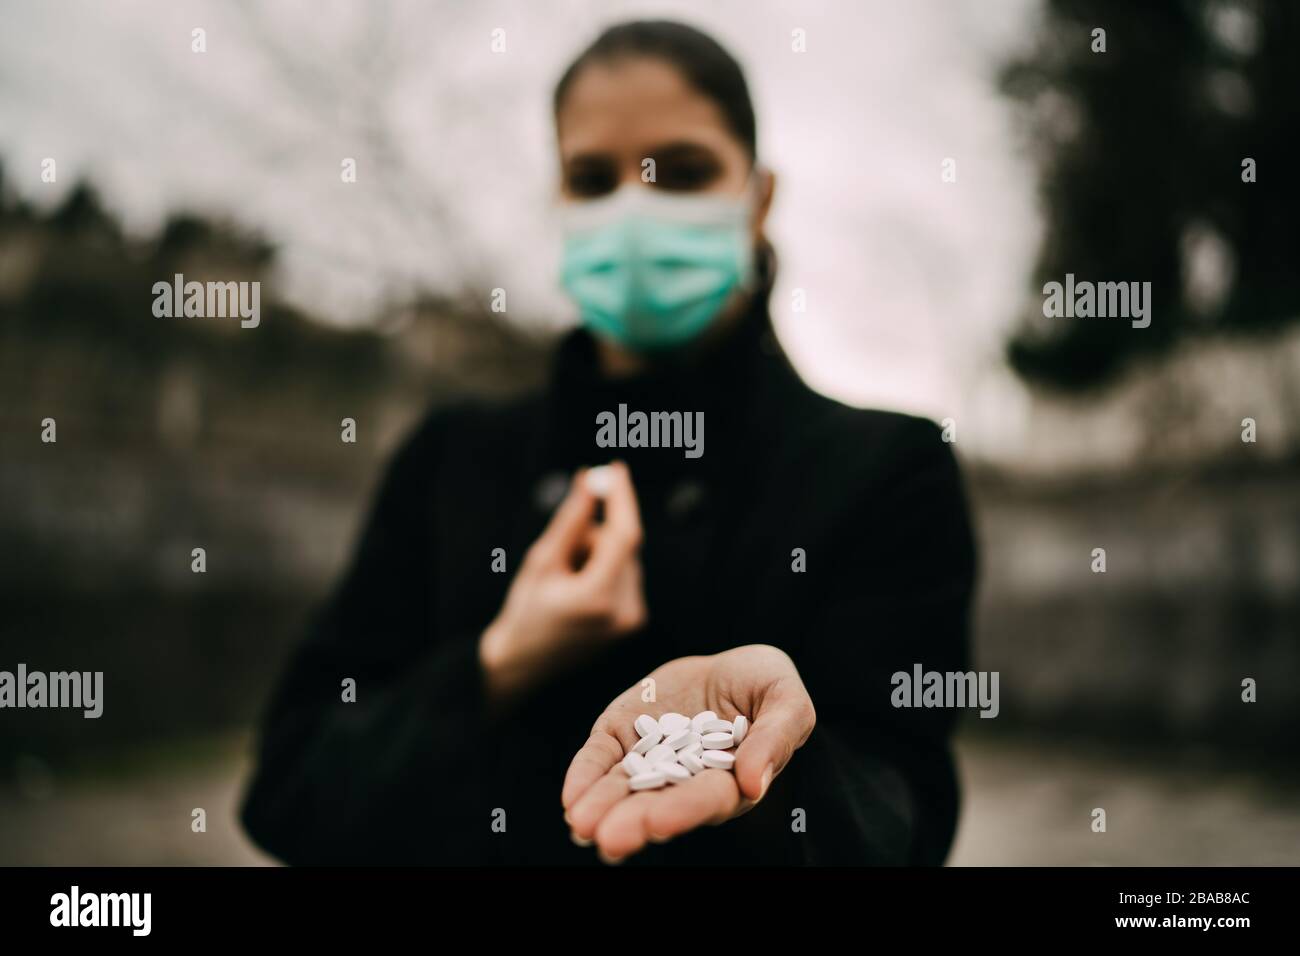 Person in mask offering medication.Dealing prescribed medication.Infected with virus/bacteria.Viral outbreak.Infection disease prevention and control. Stock Photo